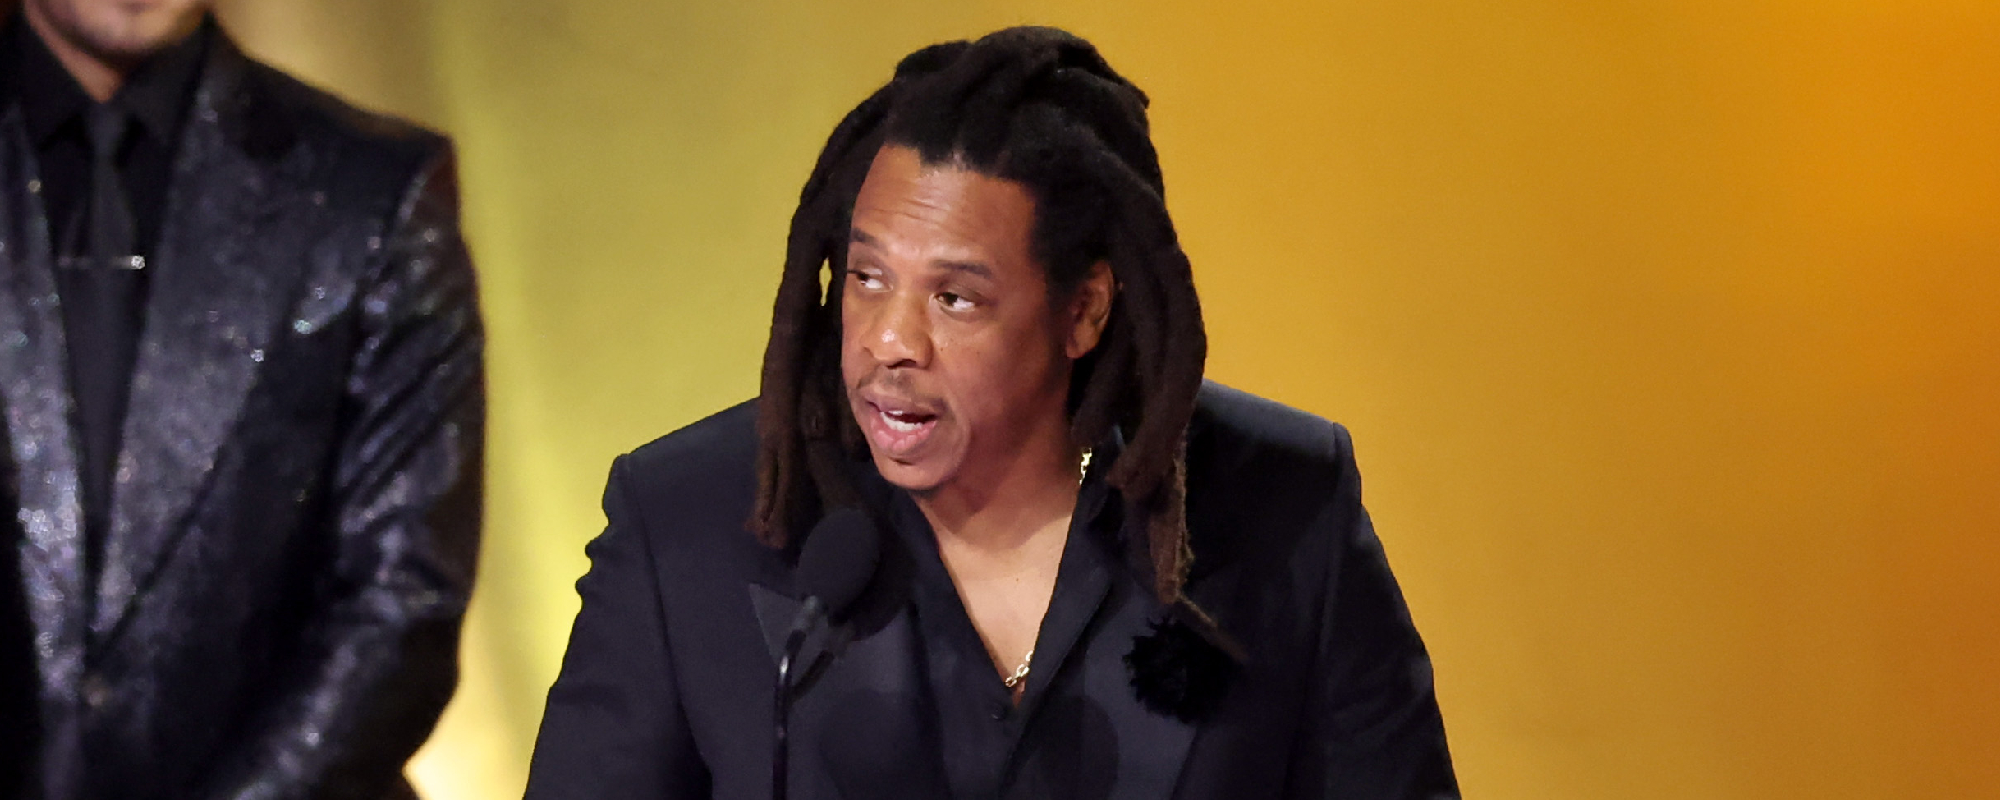 Jay-Z Calls Out GRAMMYs Over Beyoncé Snub, Name-Drops Will Smith in Wild Acceptance Speech